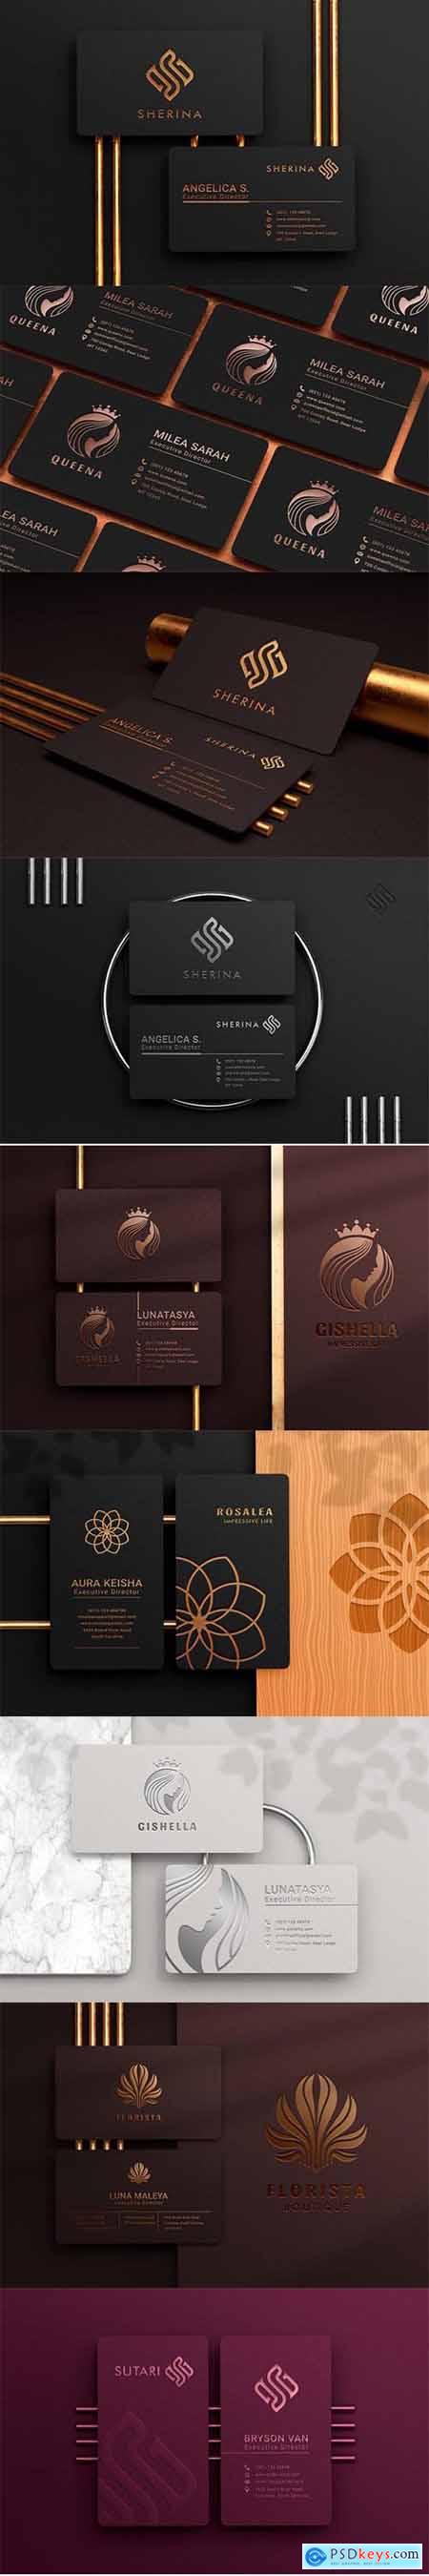 Modern and luxury business car » Free Download Photoshop Vector Stock ...